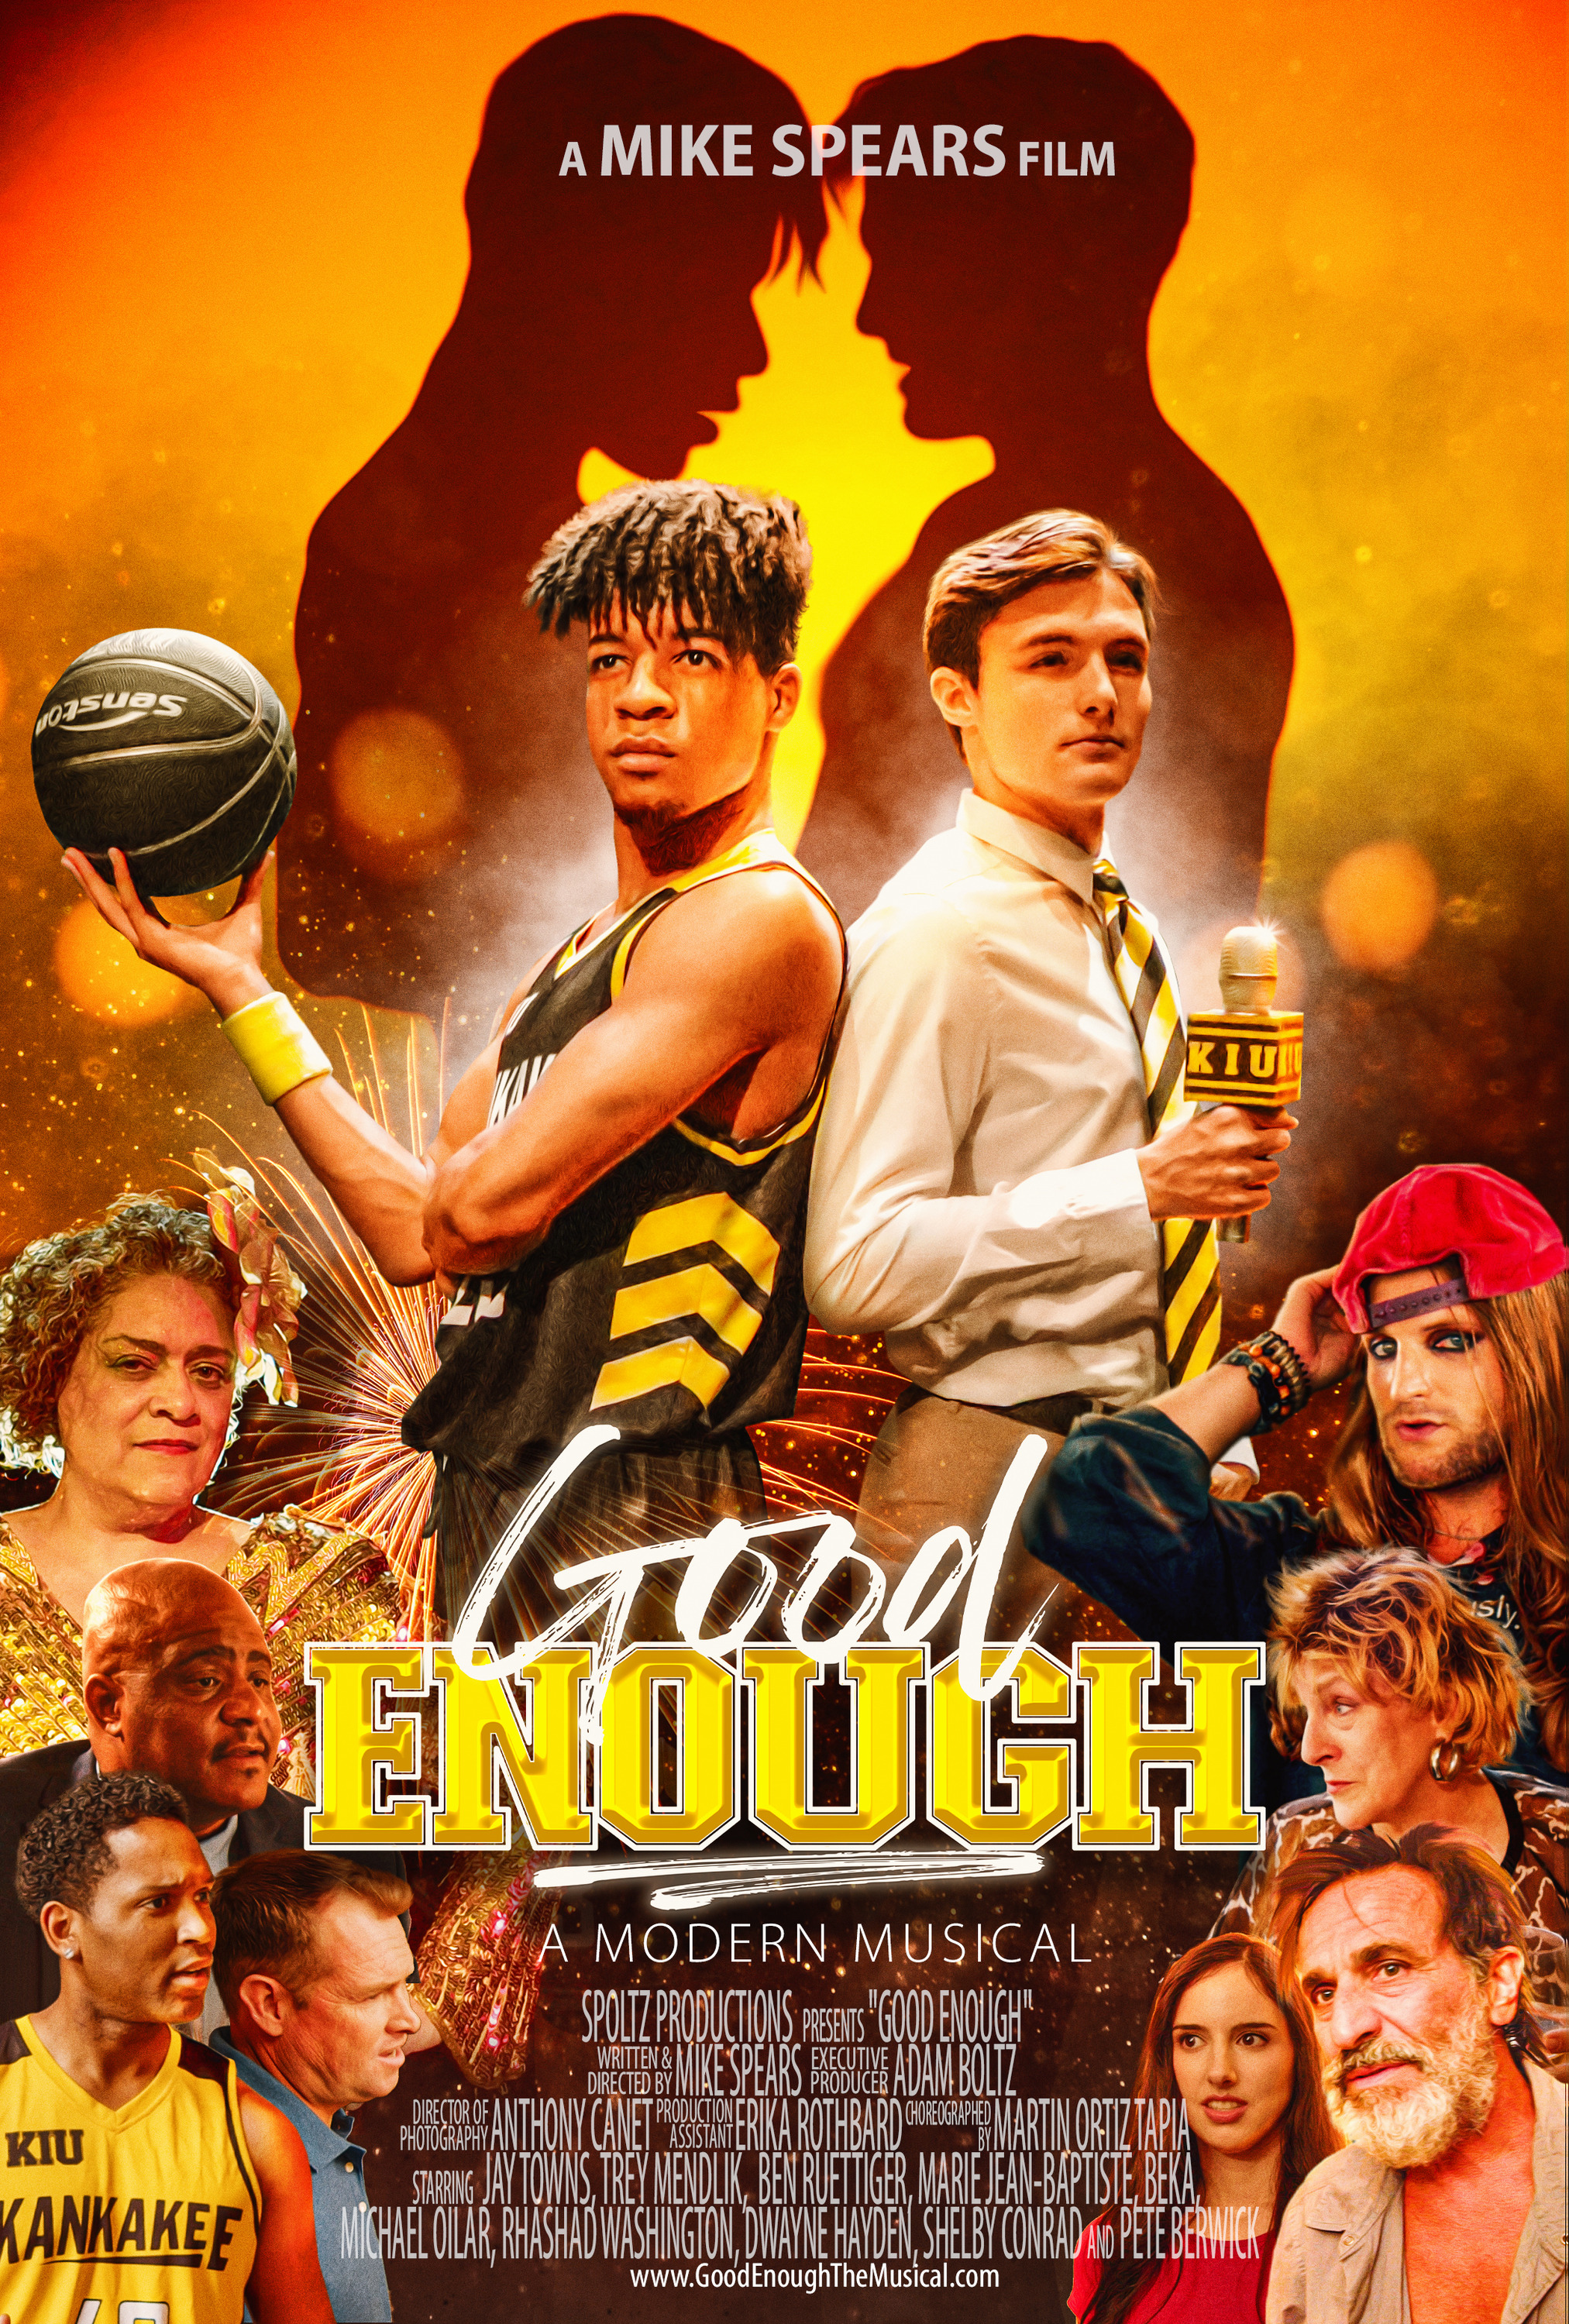 Mega Sized Movie Poster Image for Good Enough: A Modern Musical 